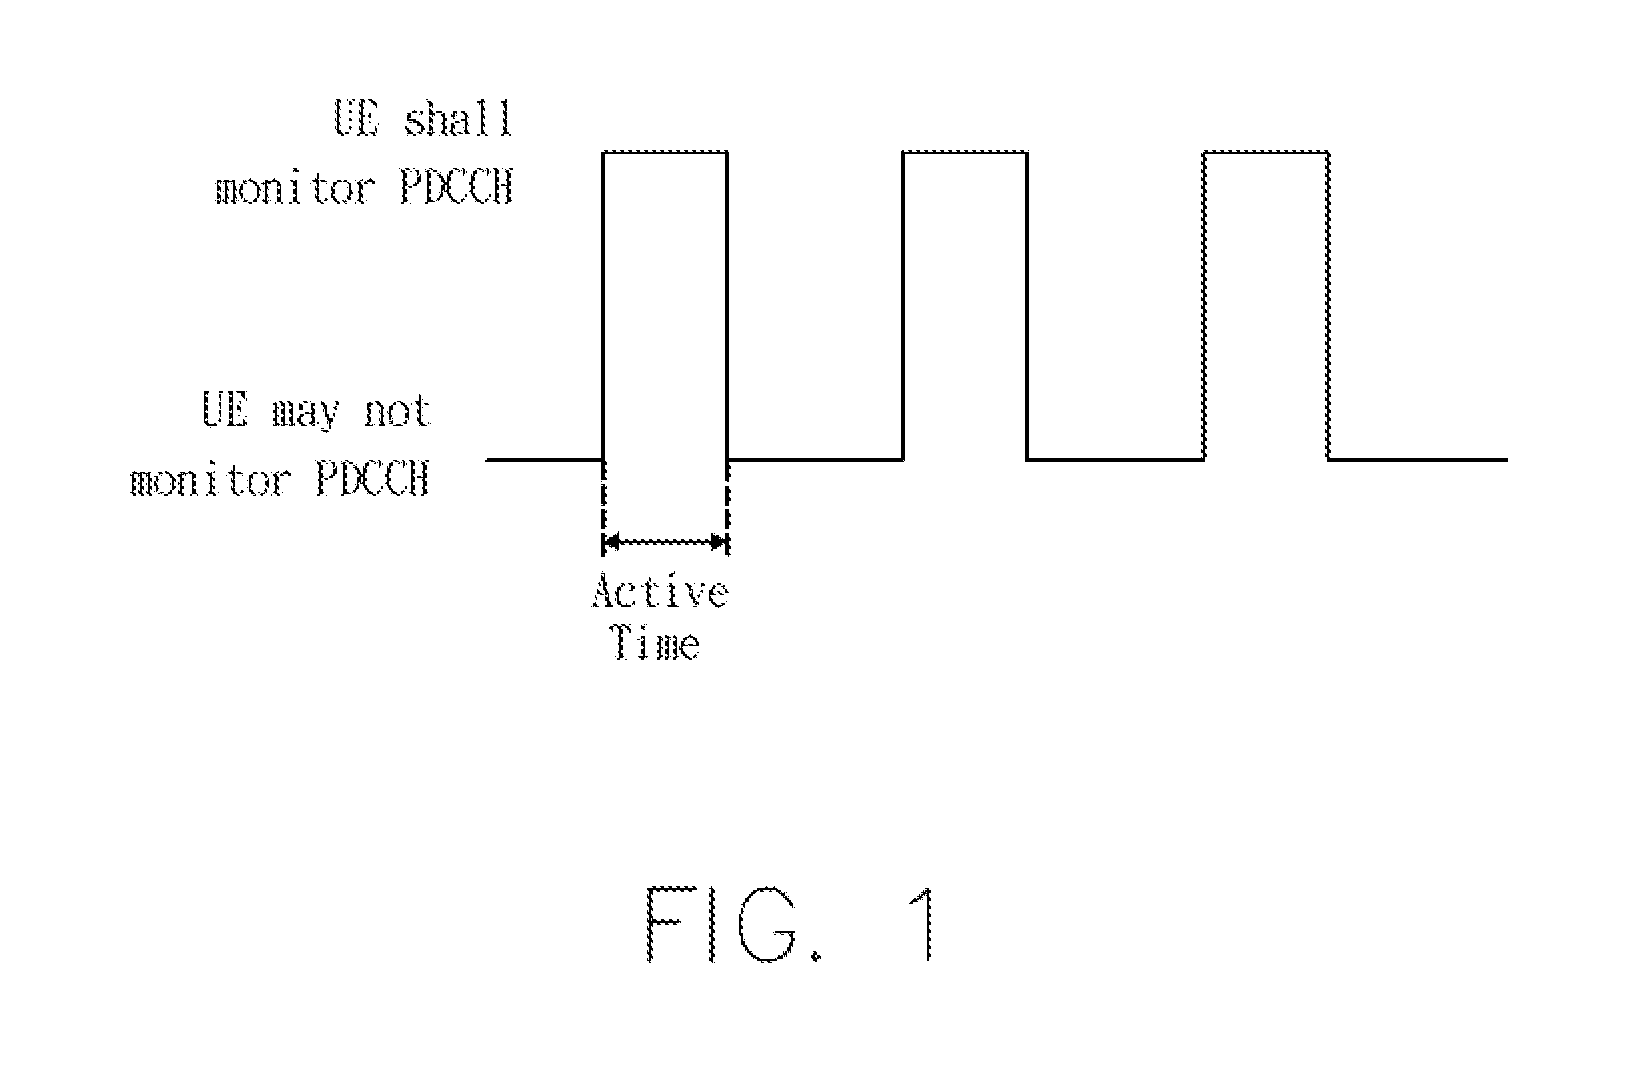 Method for reporting srs in discontinuous reception and wireless communication system thereof